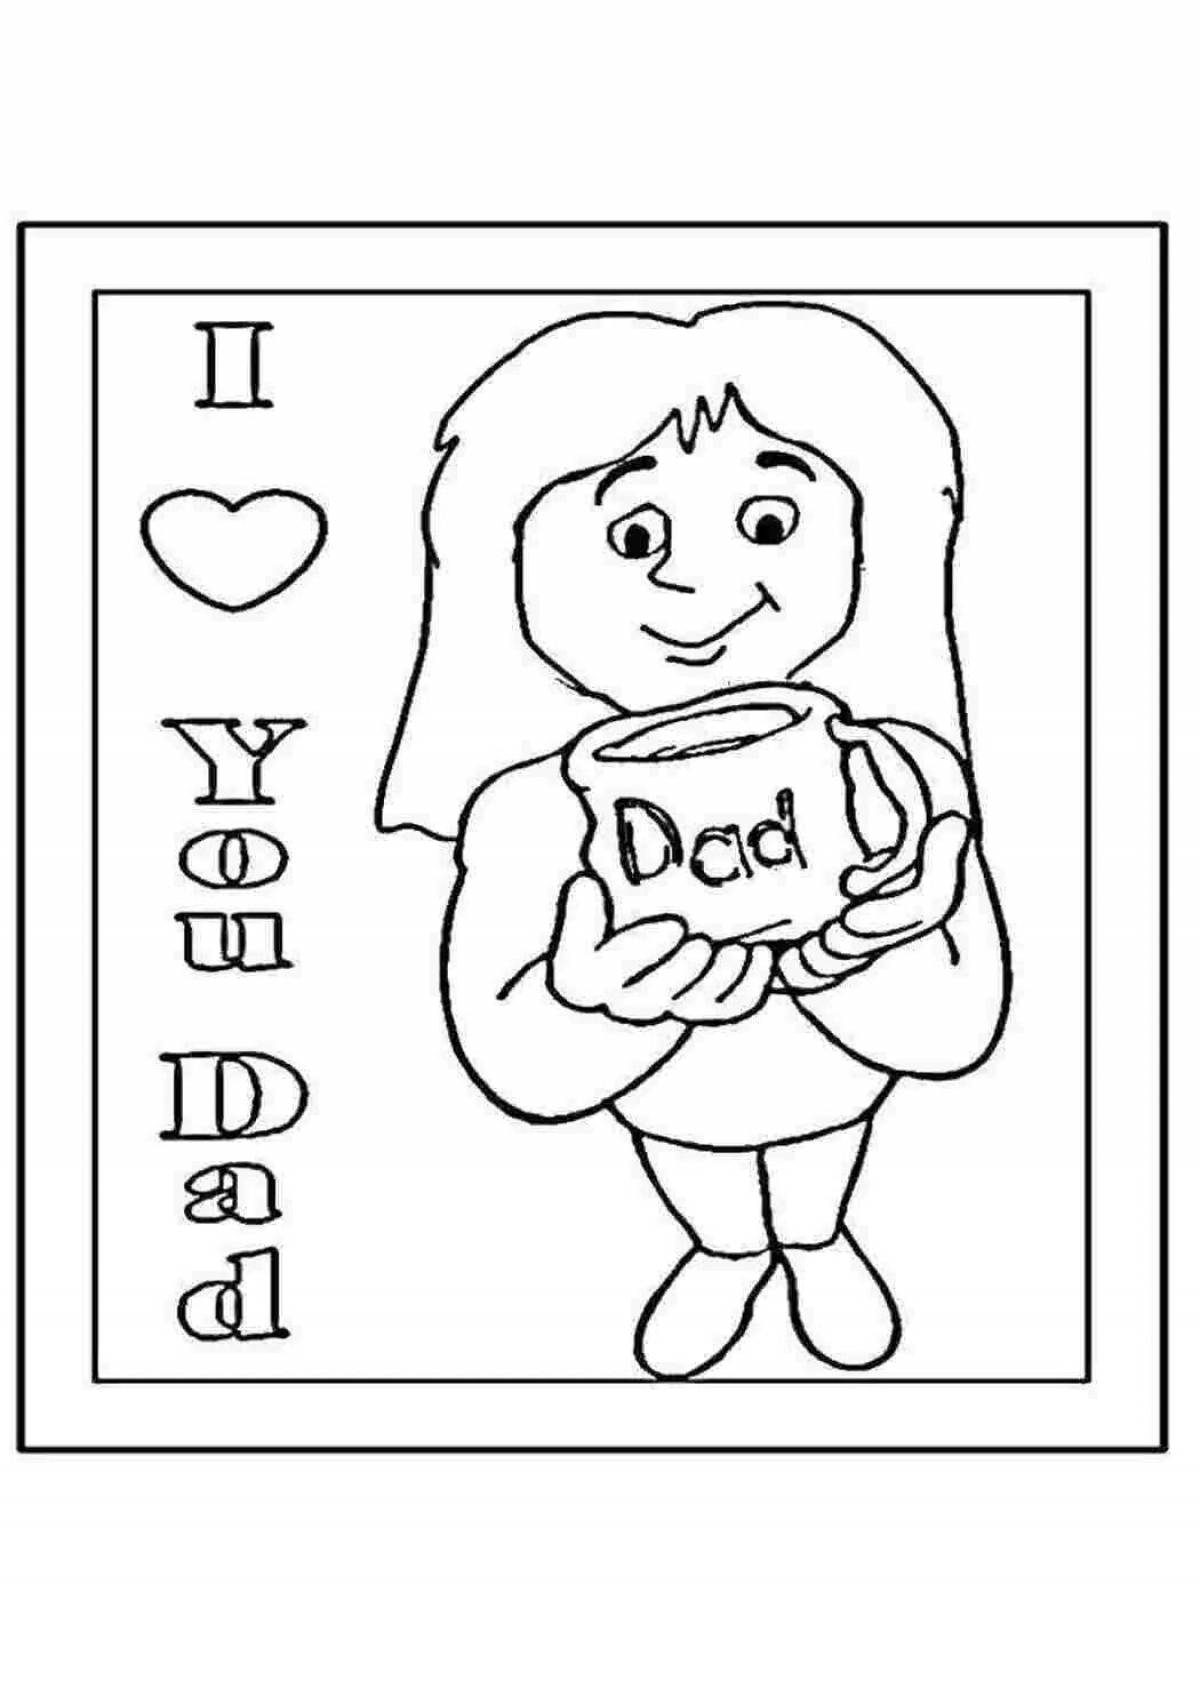 Live i love you daddy coloring page